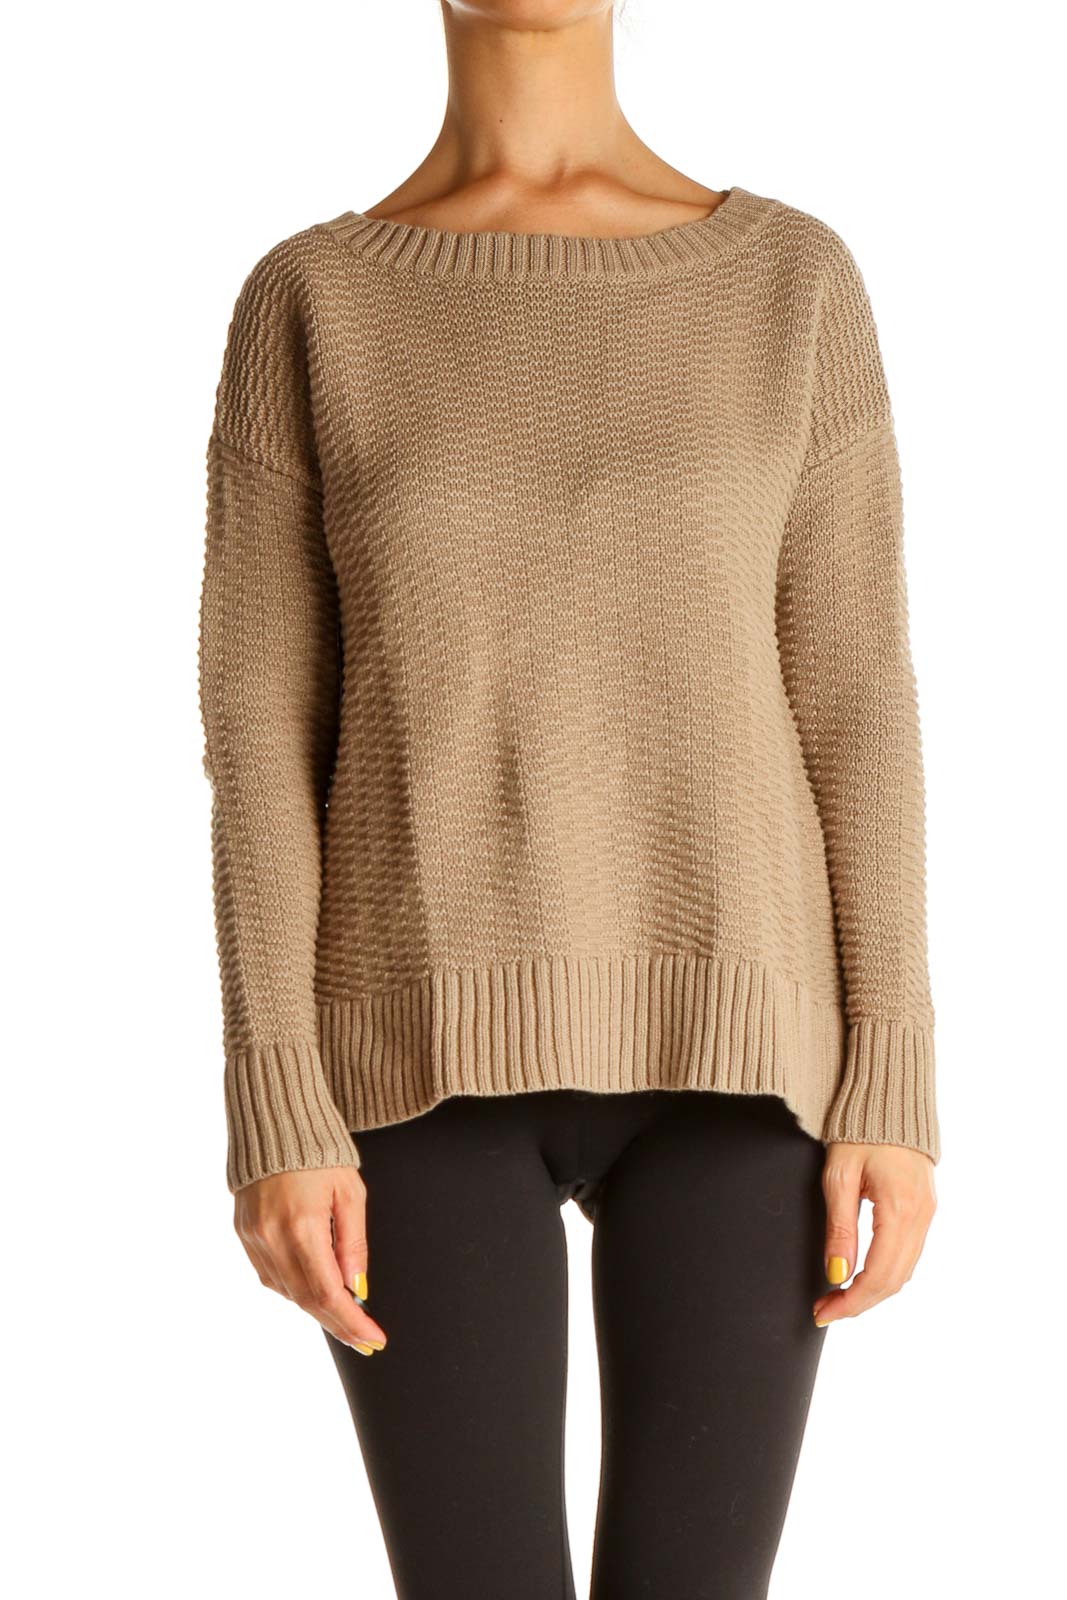 Beige Textured Classic Sweater Front